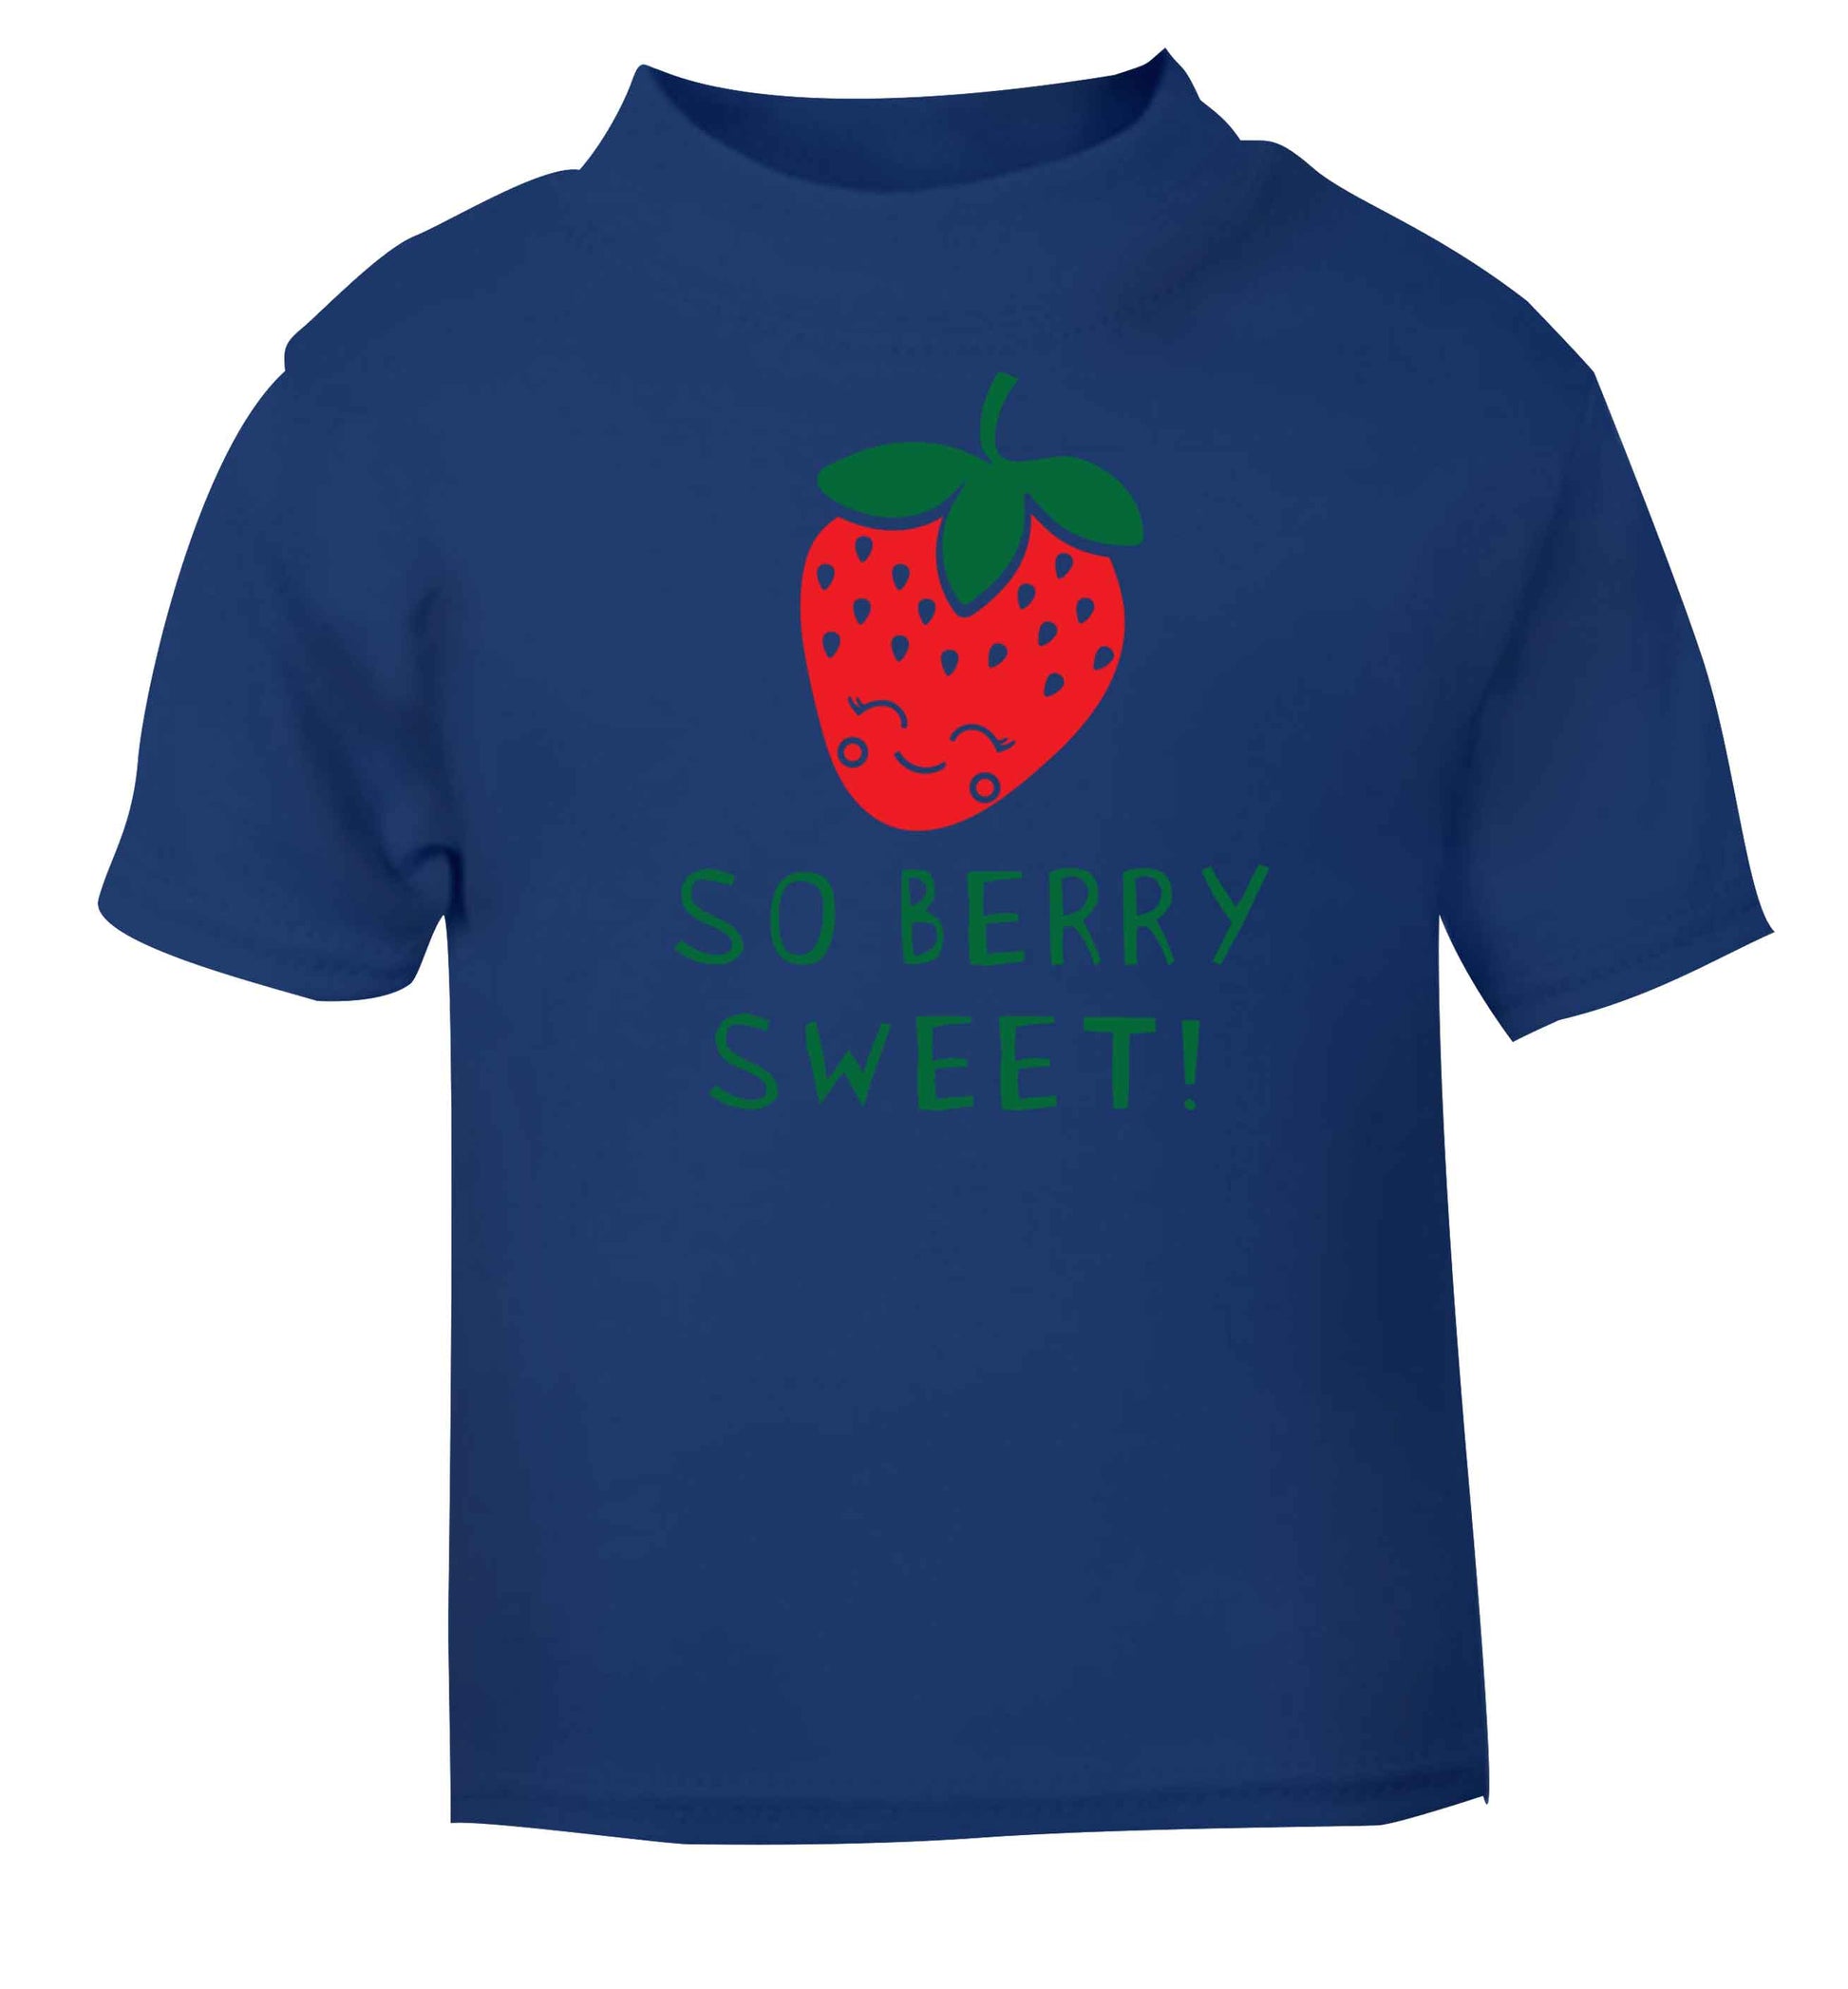 So berry sweet blue baby toddler Tshirt 2 Years